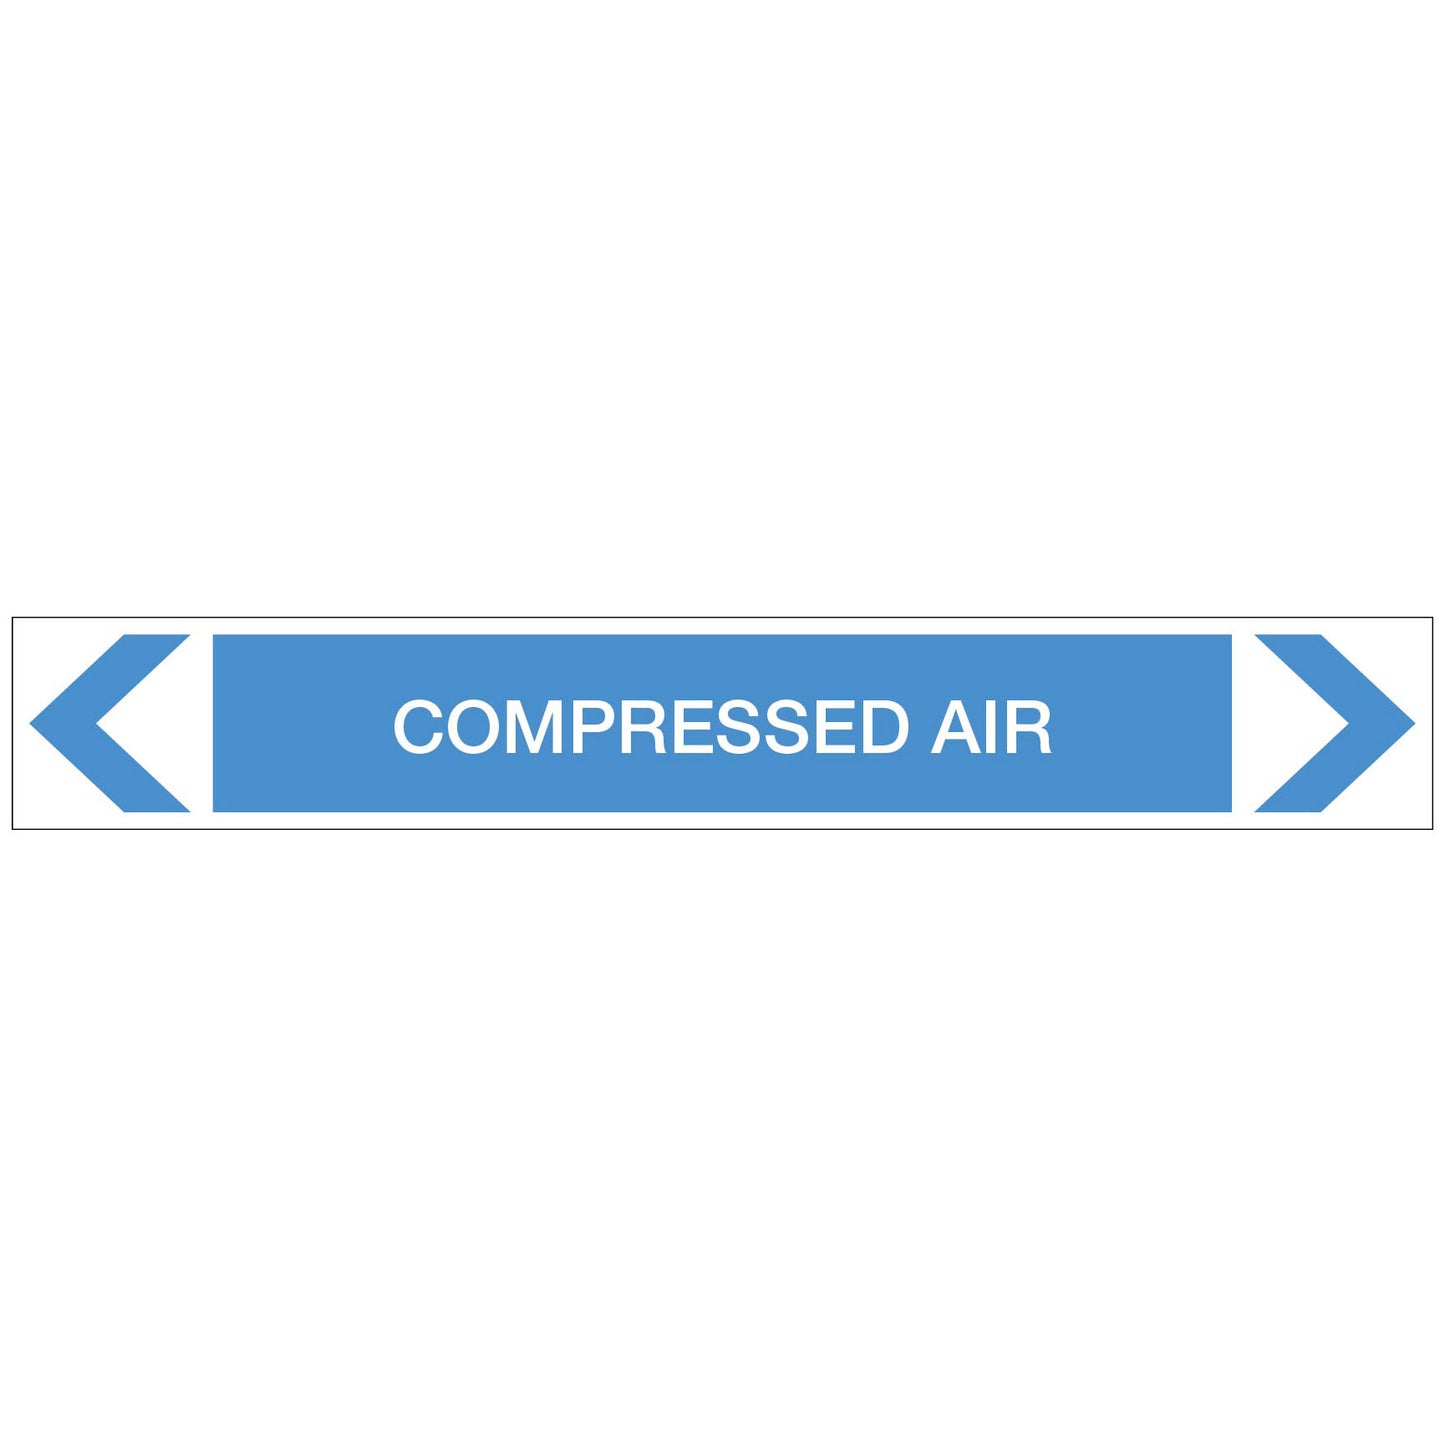 Air - Compressed Air - Pipe Marker Sticker